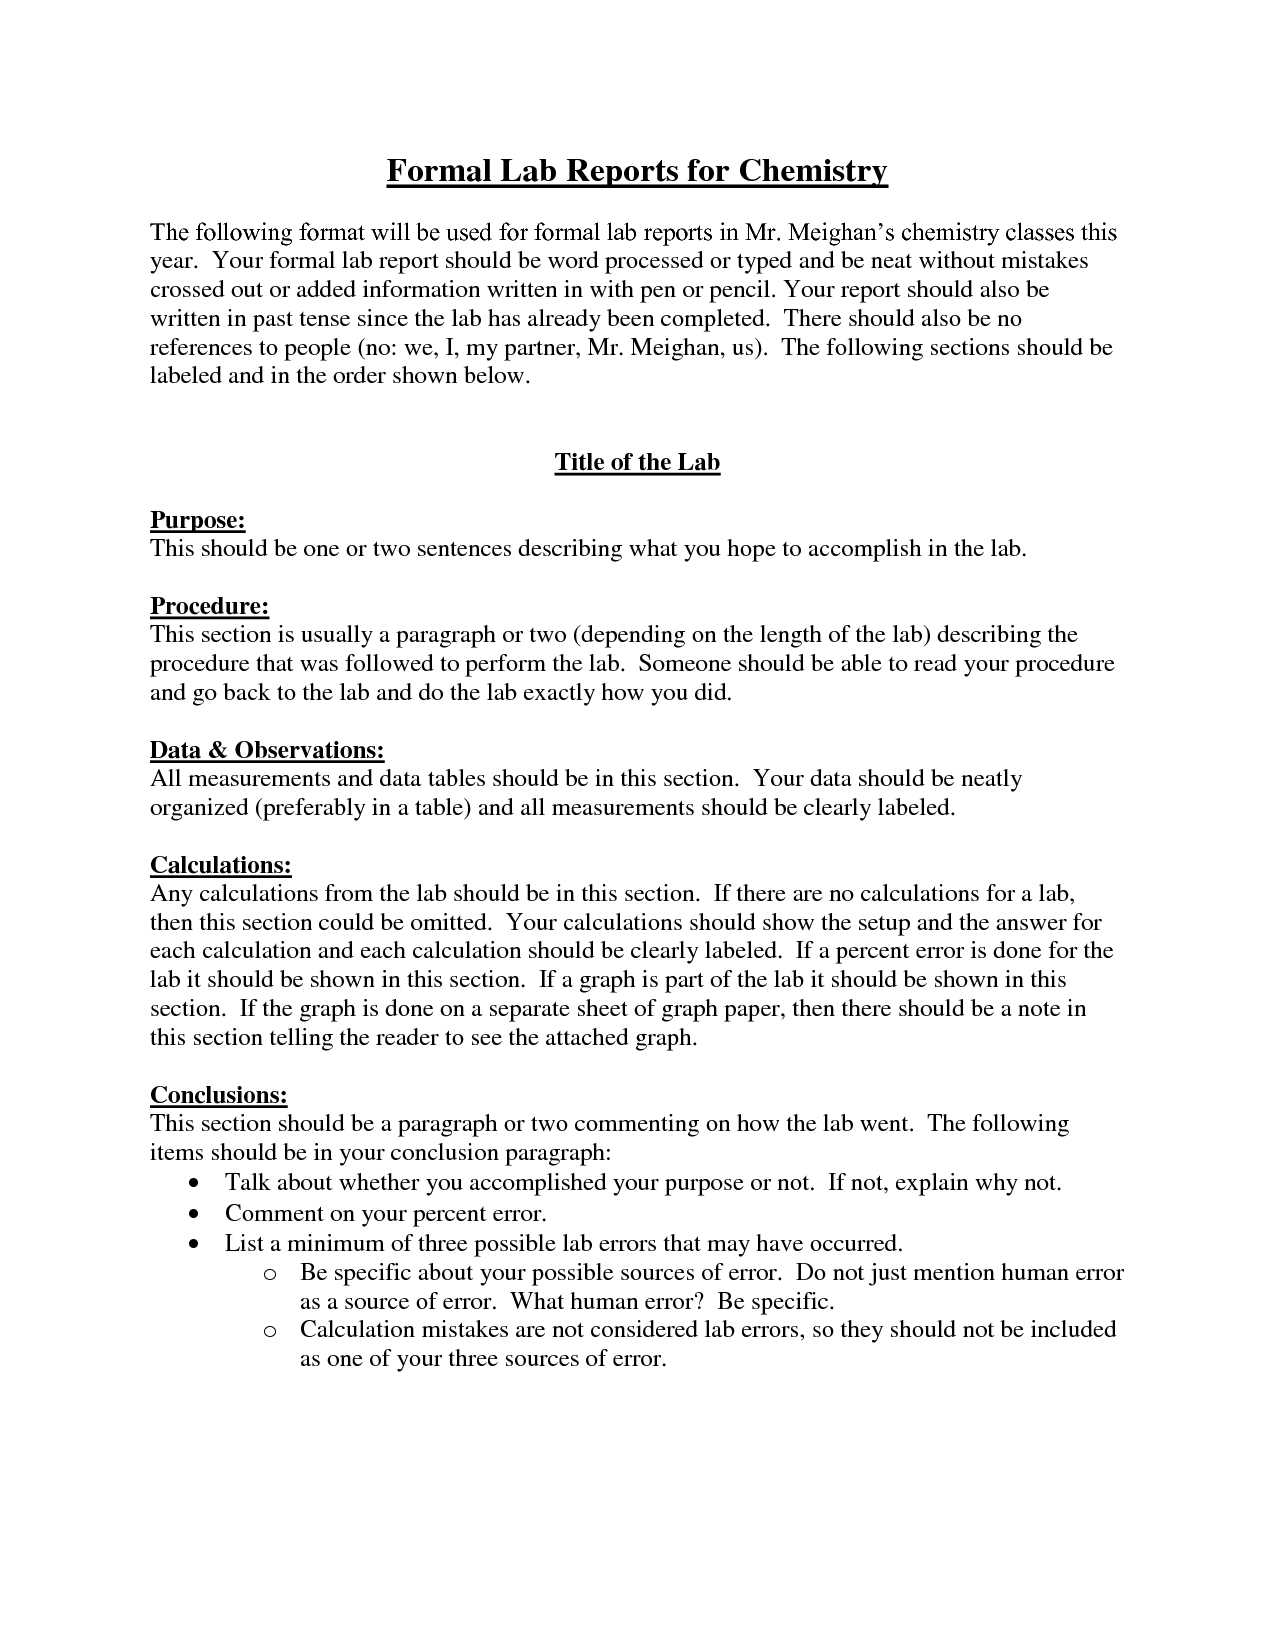 Formal Lab Reports For Chemistry : Biological Science For Formal Lab Report Template